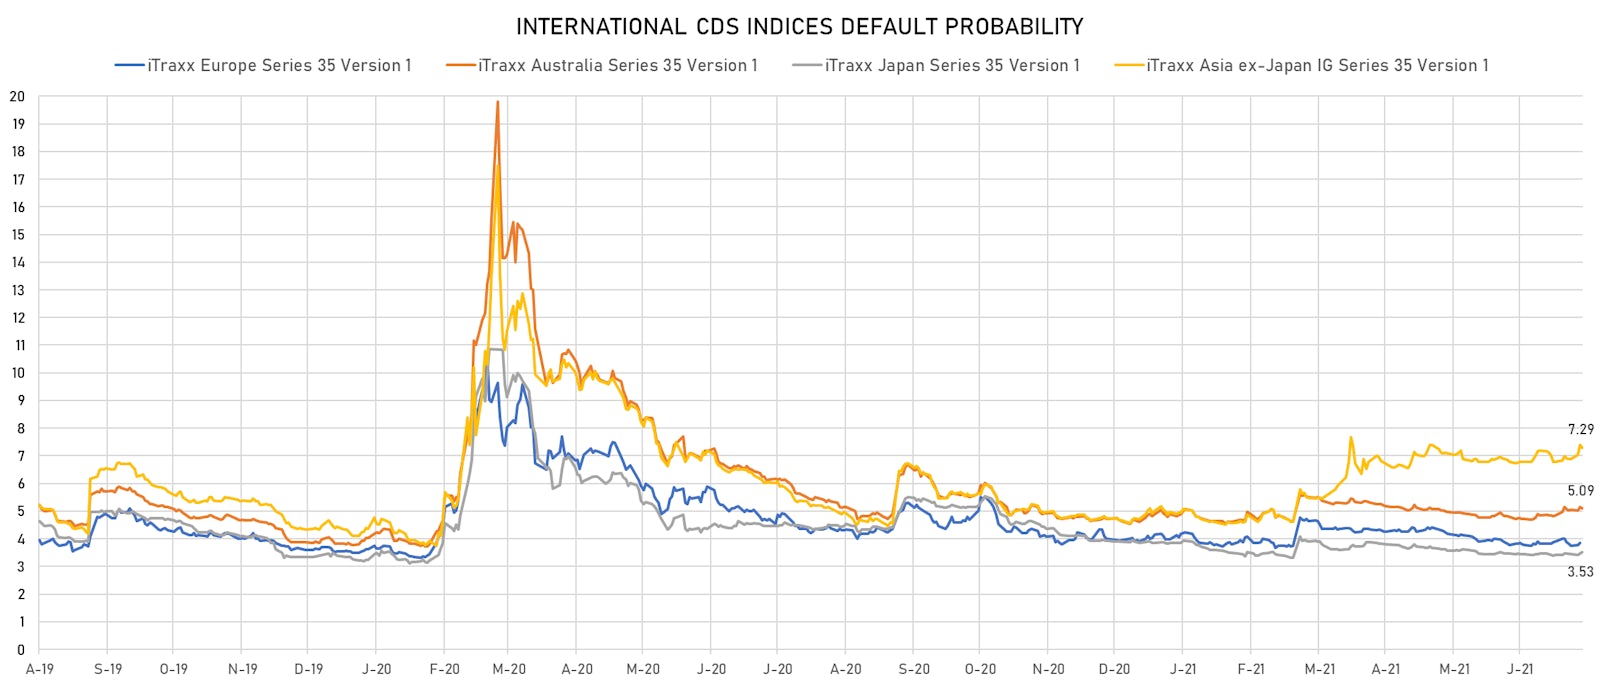 iTRAXX Credit Indices Default Probabilities | Sources: ϕpost, Refinitiv data